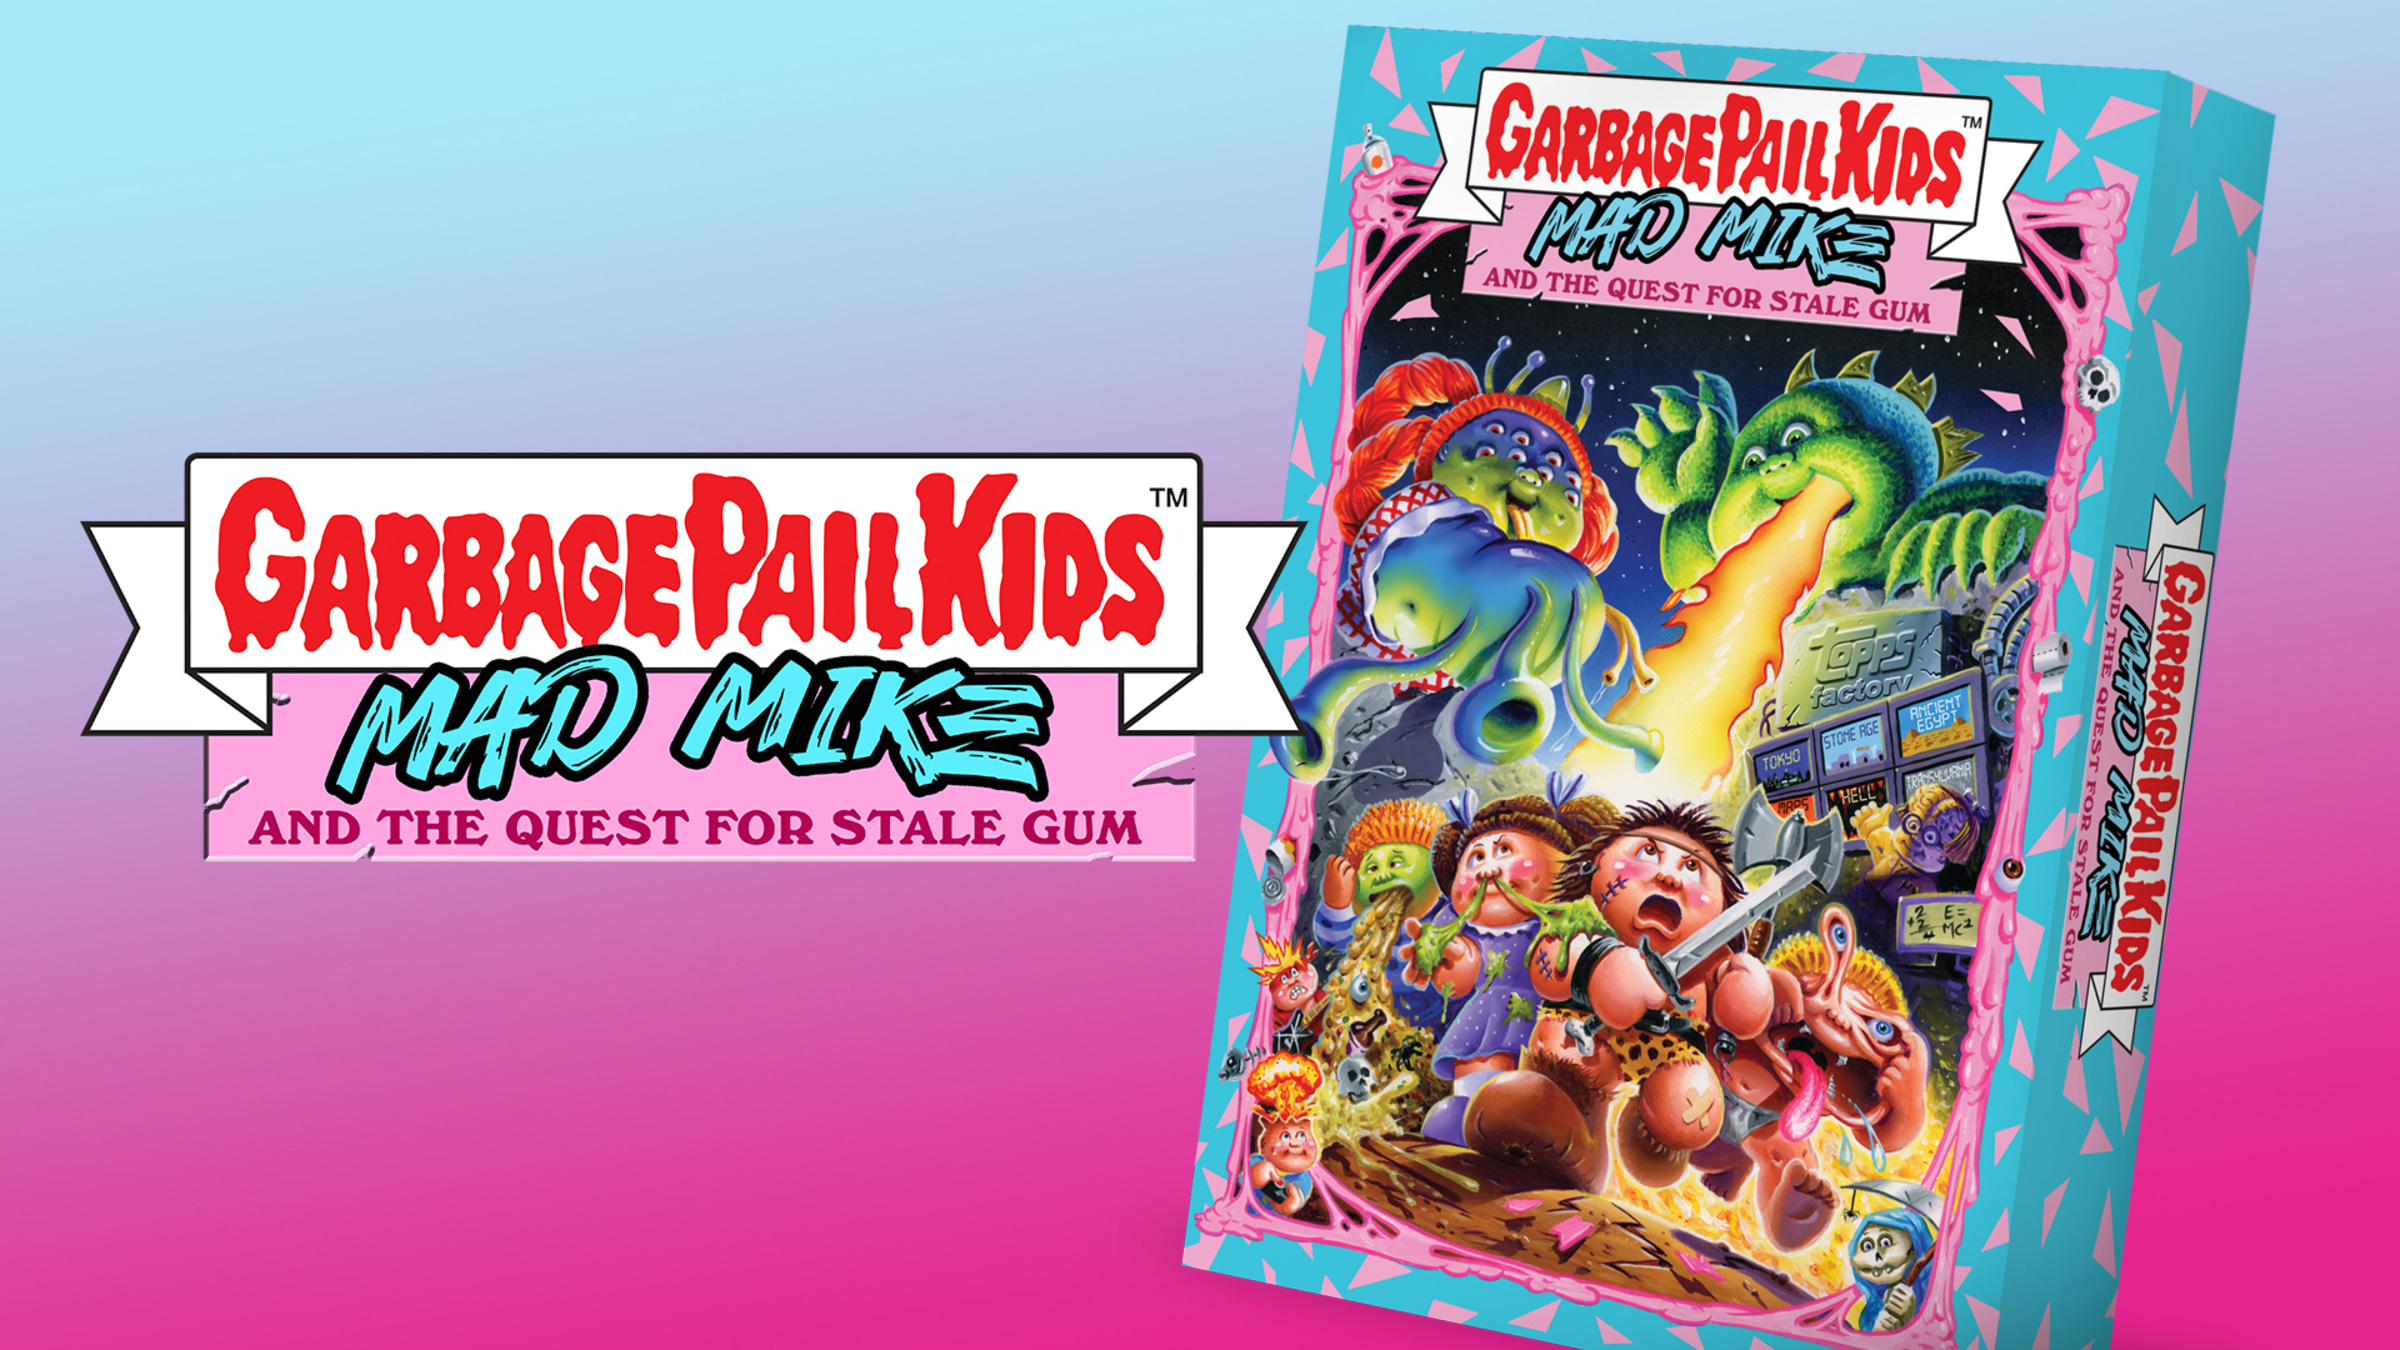 https://assets.nintendo.com/image/upload/c_fill,w_1200/q_auto:best/f_auto/dpr_2.0/ncom/en_US/games/switch/g/garbage-pail-kids-mad-mike-and-the-quest-for-stale-gum-switch/